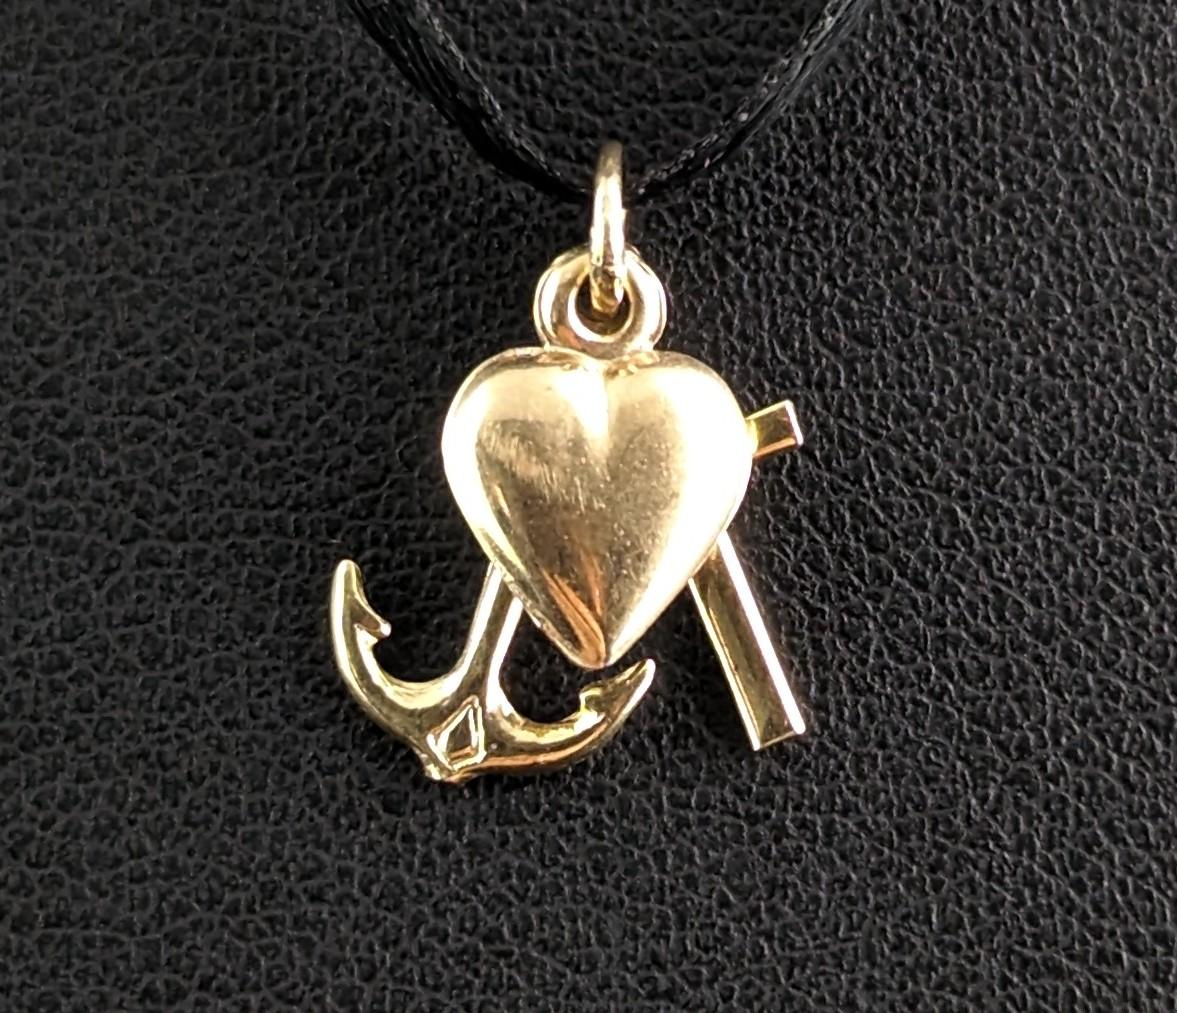 Women's Vintage 9k Gold Faith, Hope and Charity Charm Pendant